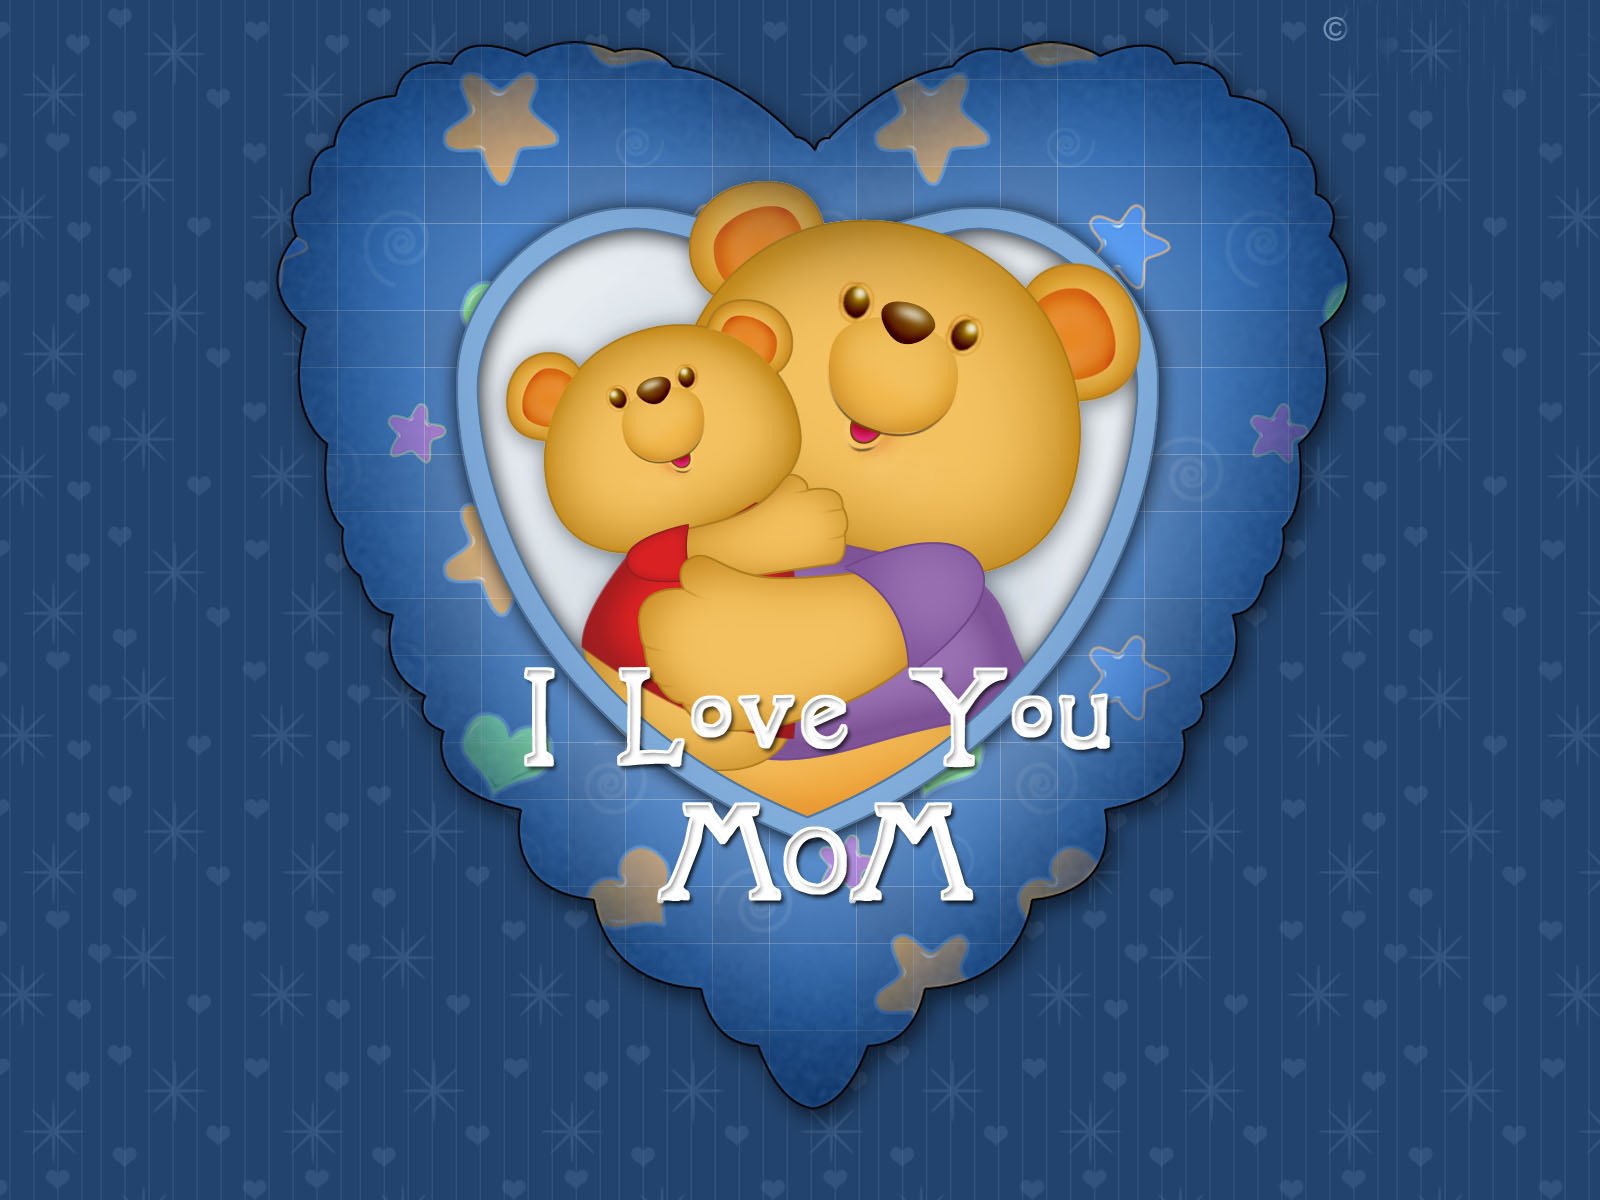 I Love Mom Fabric Wallpaper and Home Decor  Spoonflower